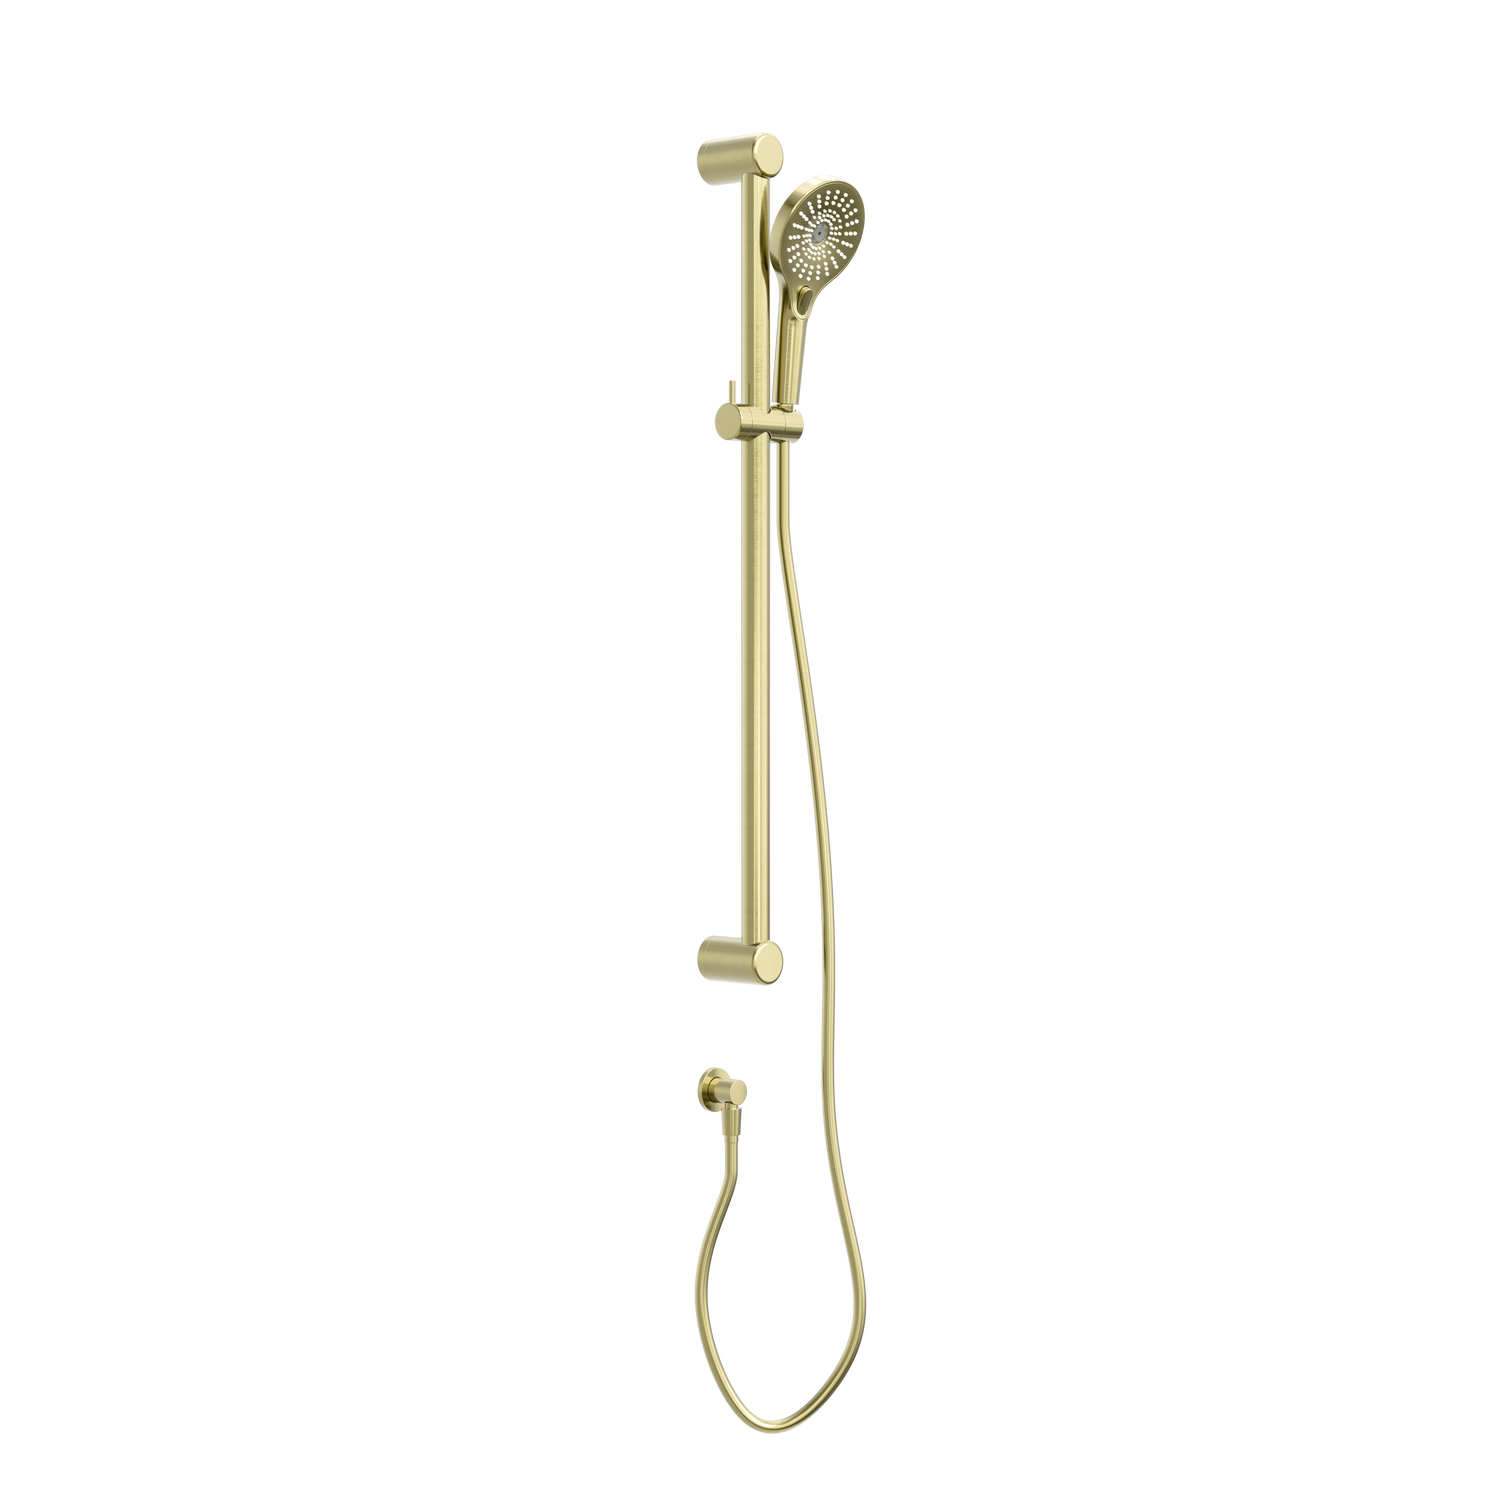 Nero Mecca Care 32mm Grab Rail And Adjustable Shower Rail Set 900mm, Brushed Gold